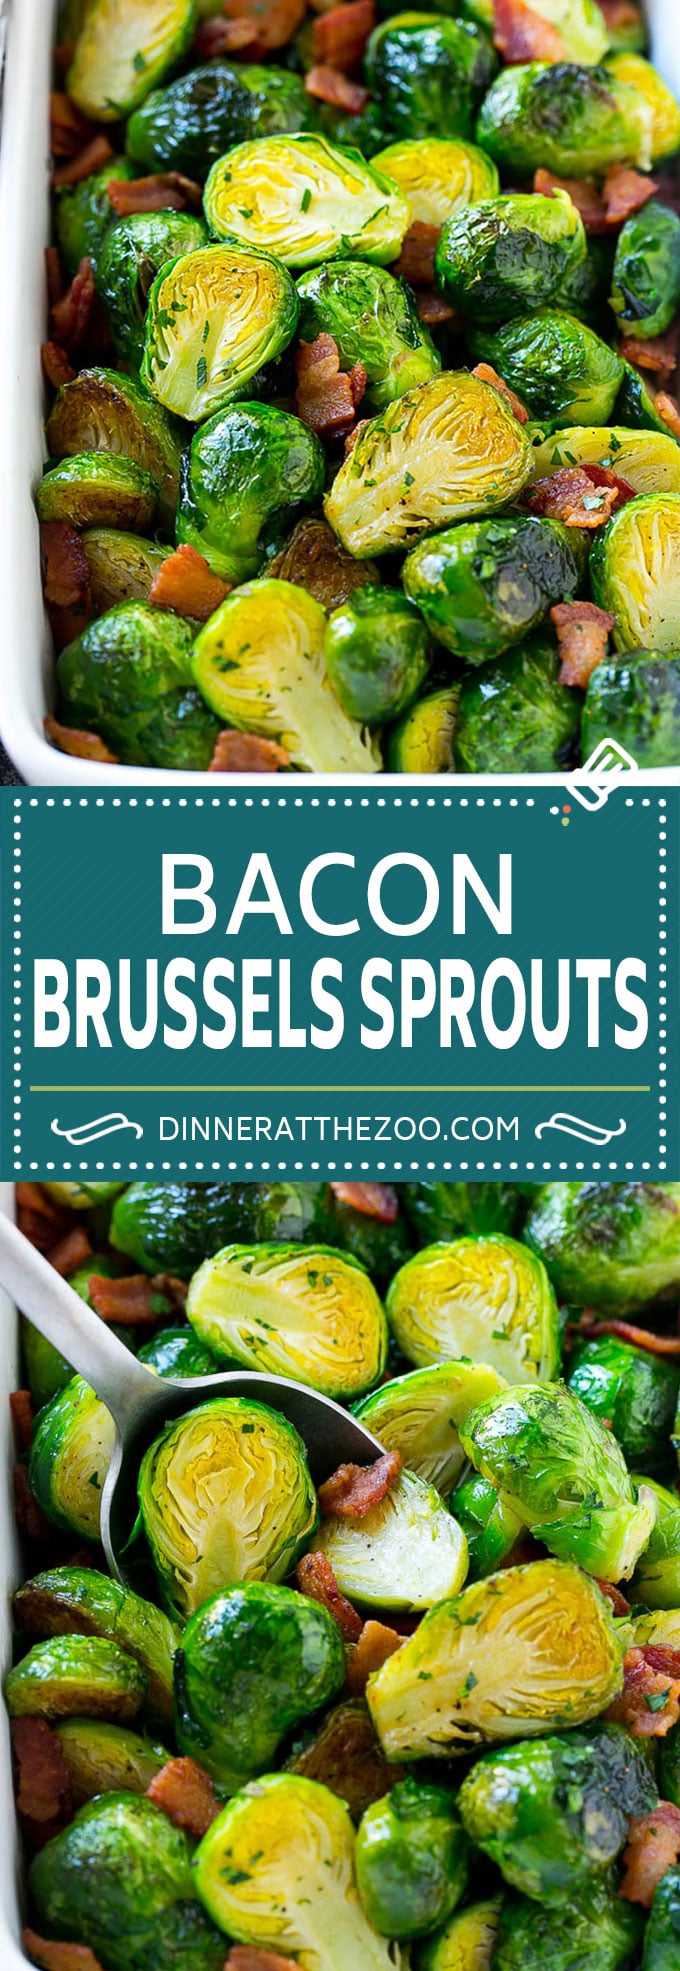 These bacon roasted brussels sprouts are crispy on the outside, soft on the inside and full of smoky flavor.